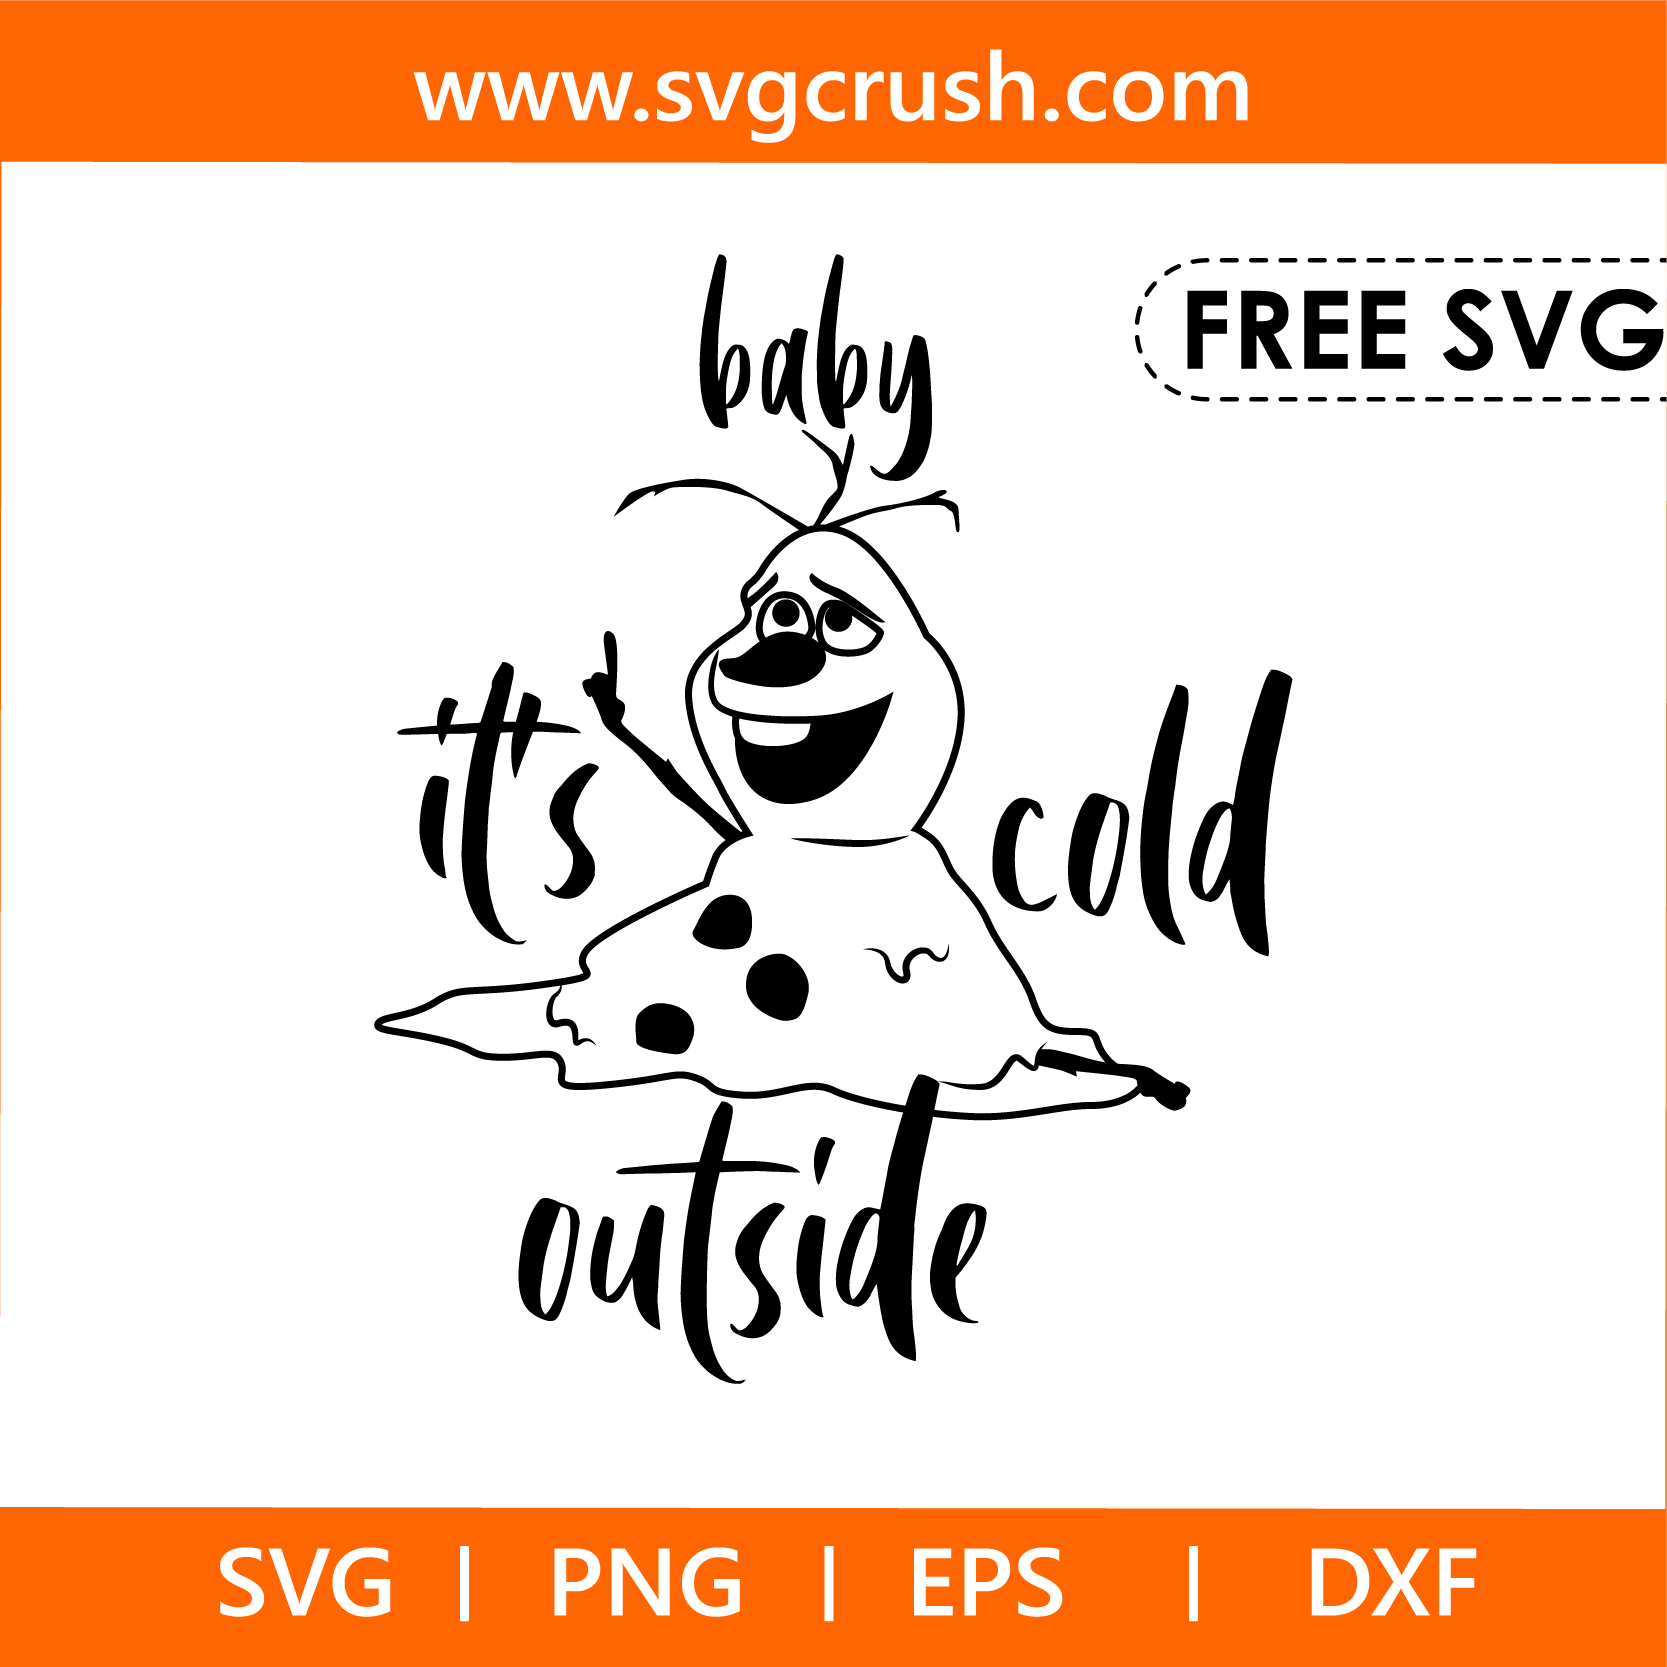 free baby-its-cold-outside-005 svg